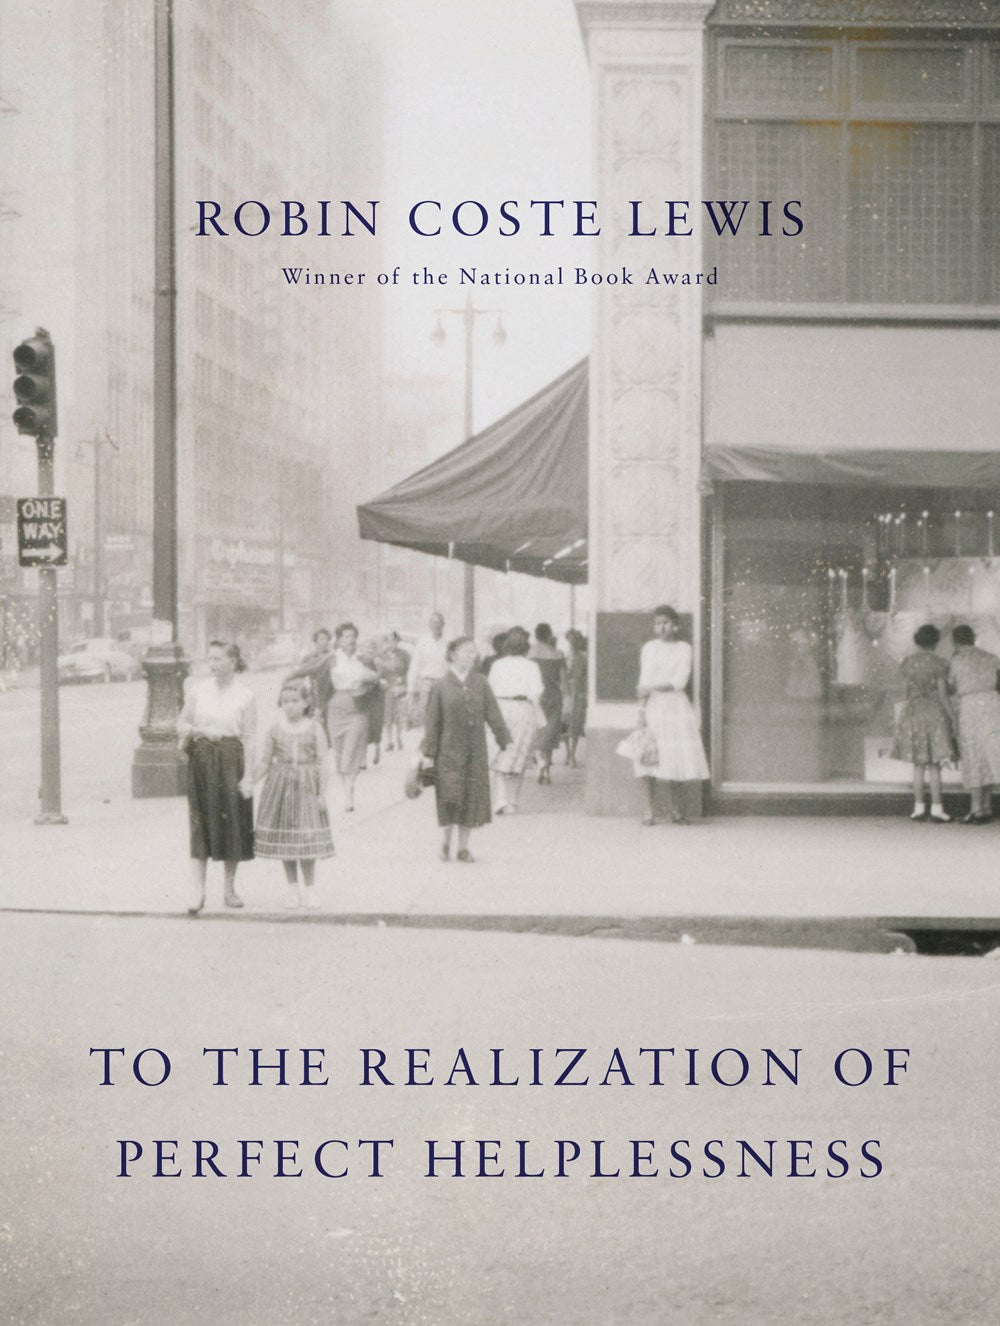 To the Realization of Perfect Helplessness by Robin Coste Lewis